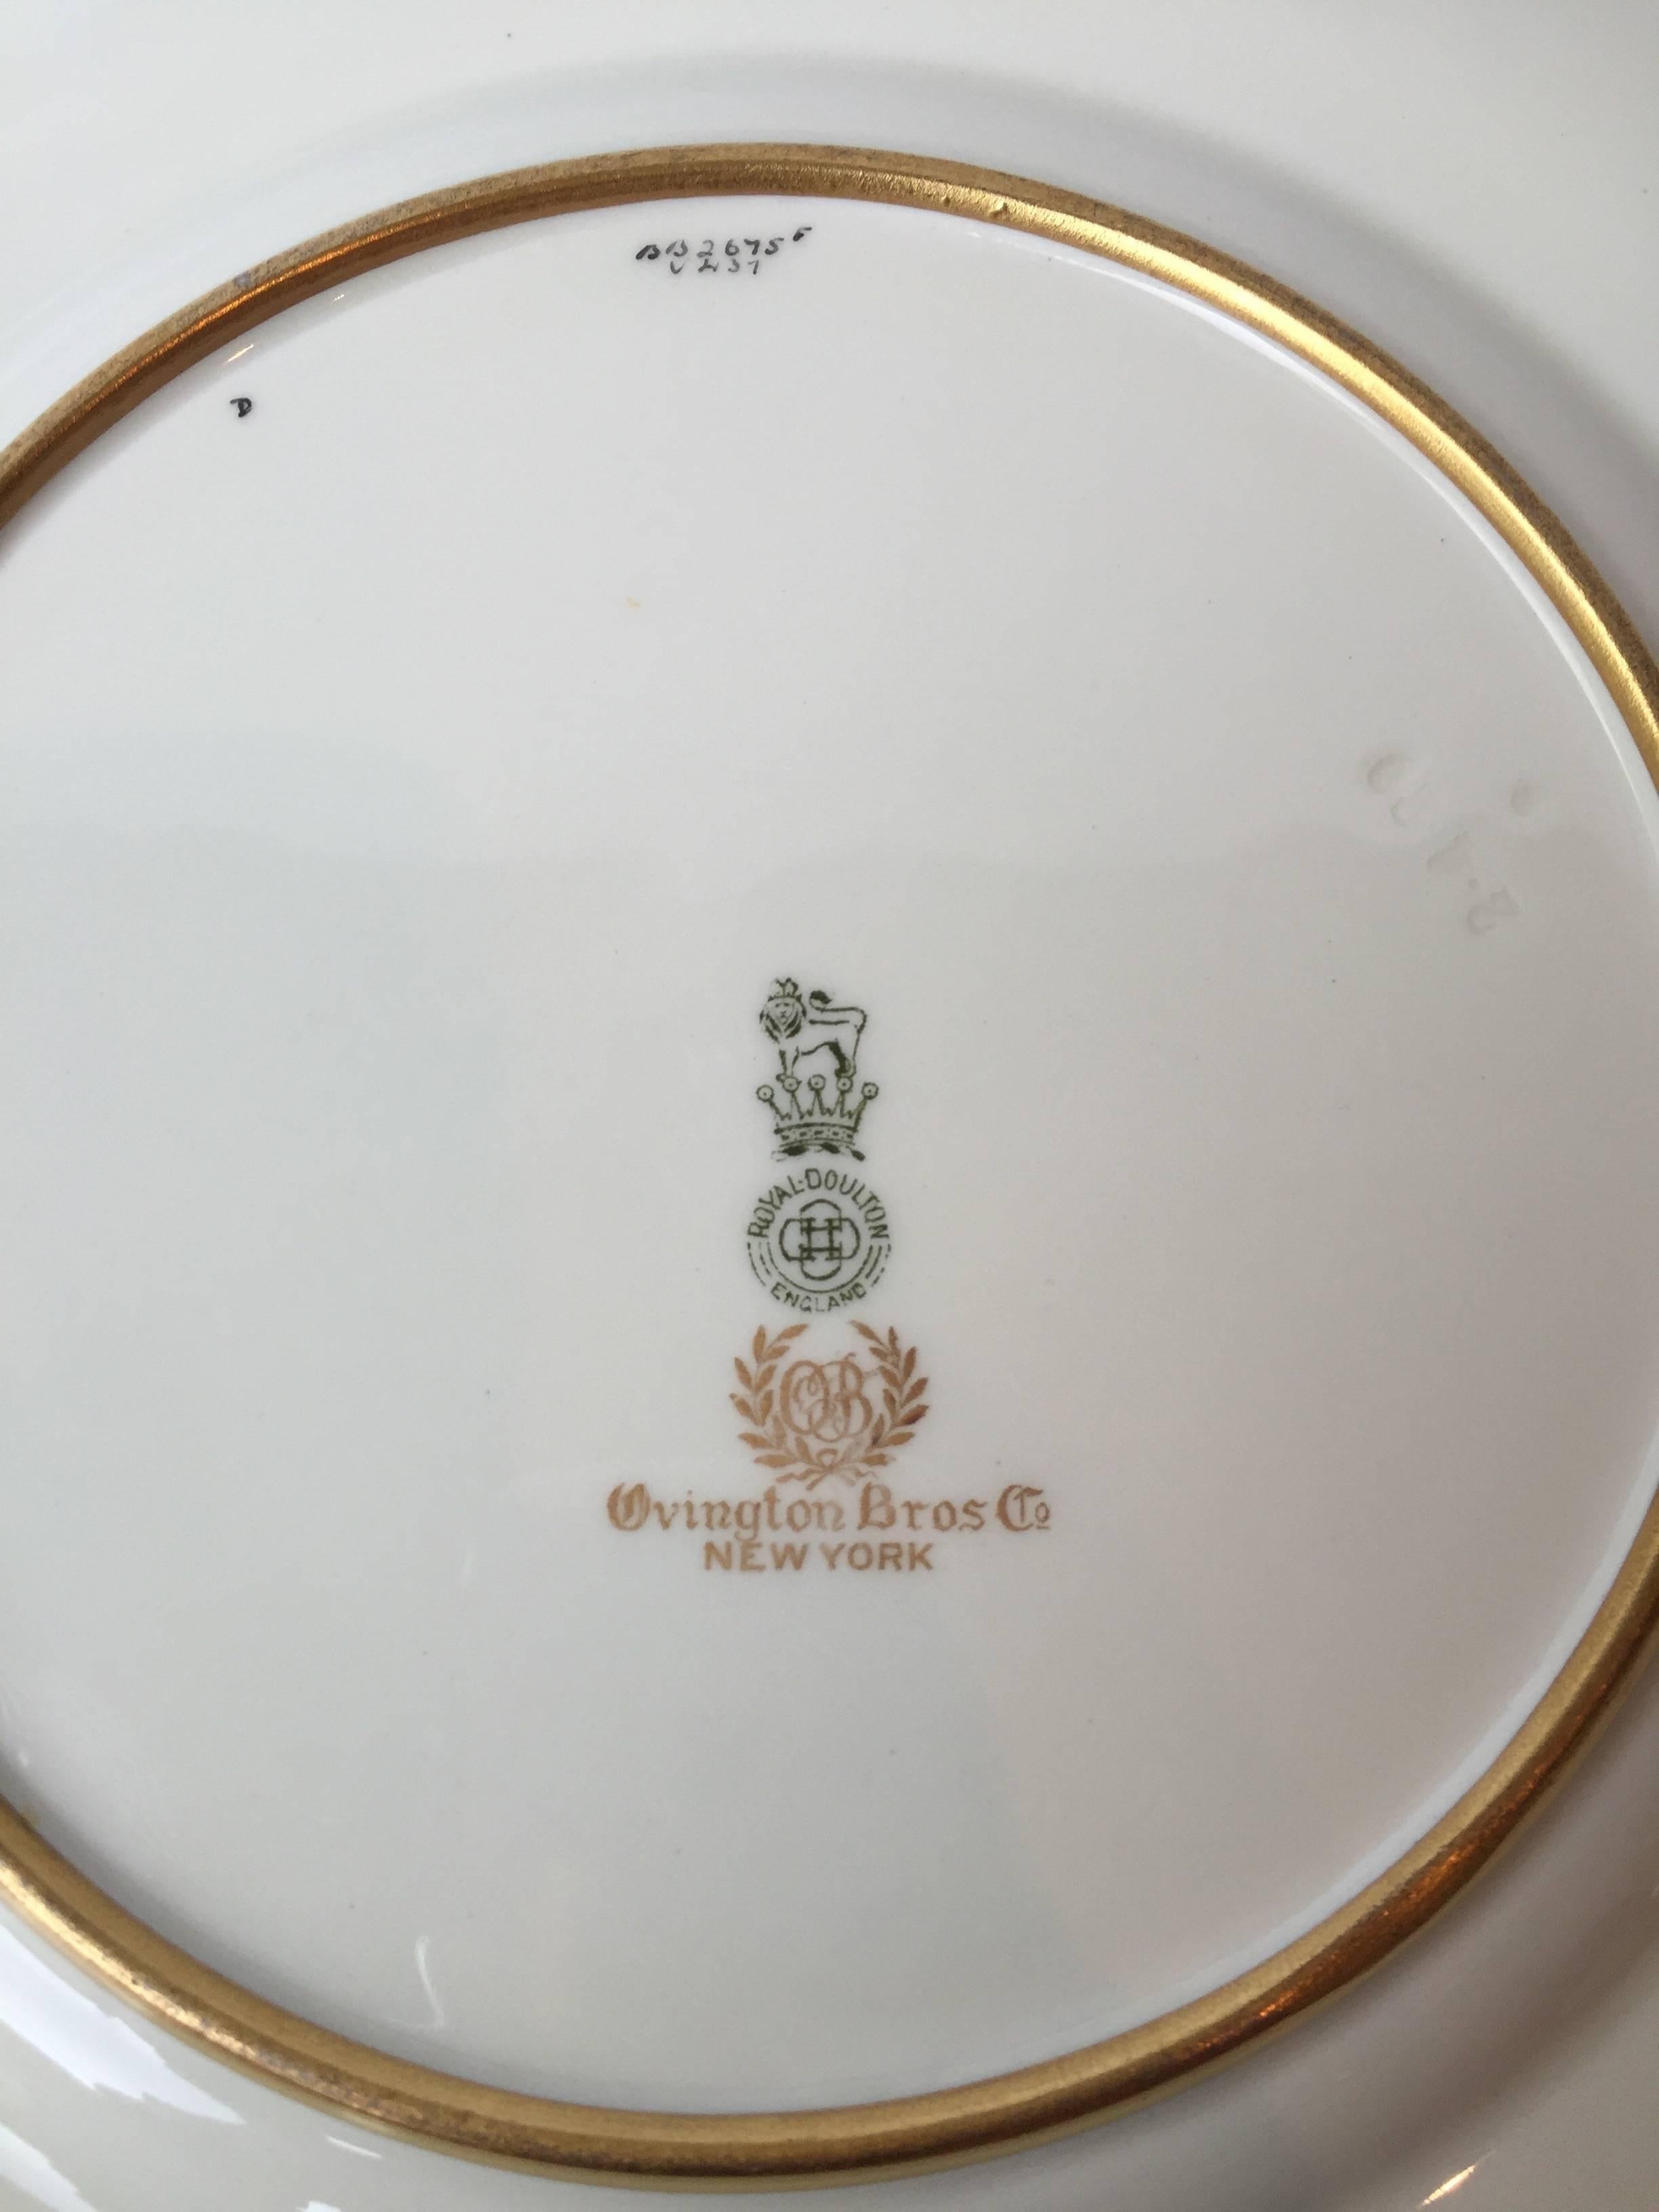 Royal Doulton Service Plates Heavy Raised Paste Gilt, 1940s In Excellent Condition For Sale In Redding, CA